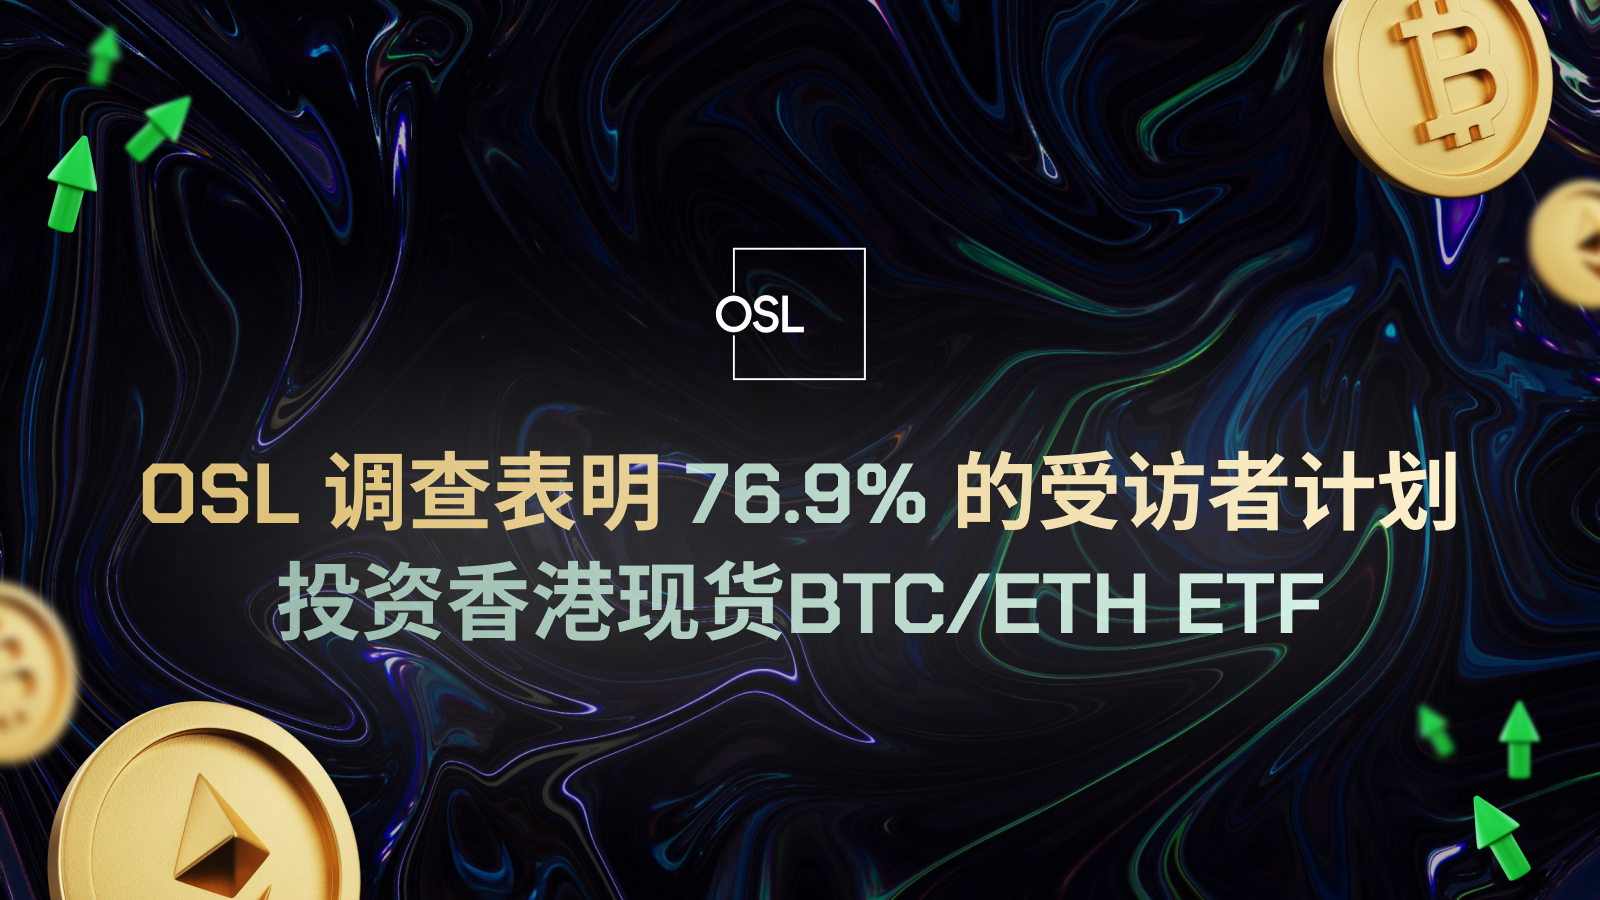 OSL Survey Reveals 76.9% of Respondents Plan to Invest in Spot BTC/ETH ETFs in Hong Kong